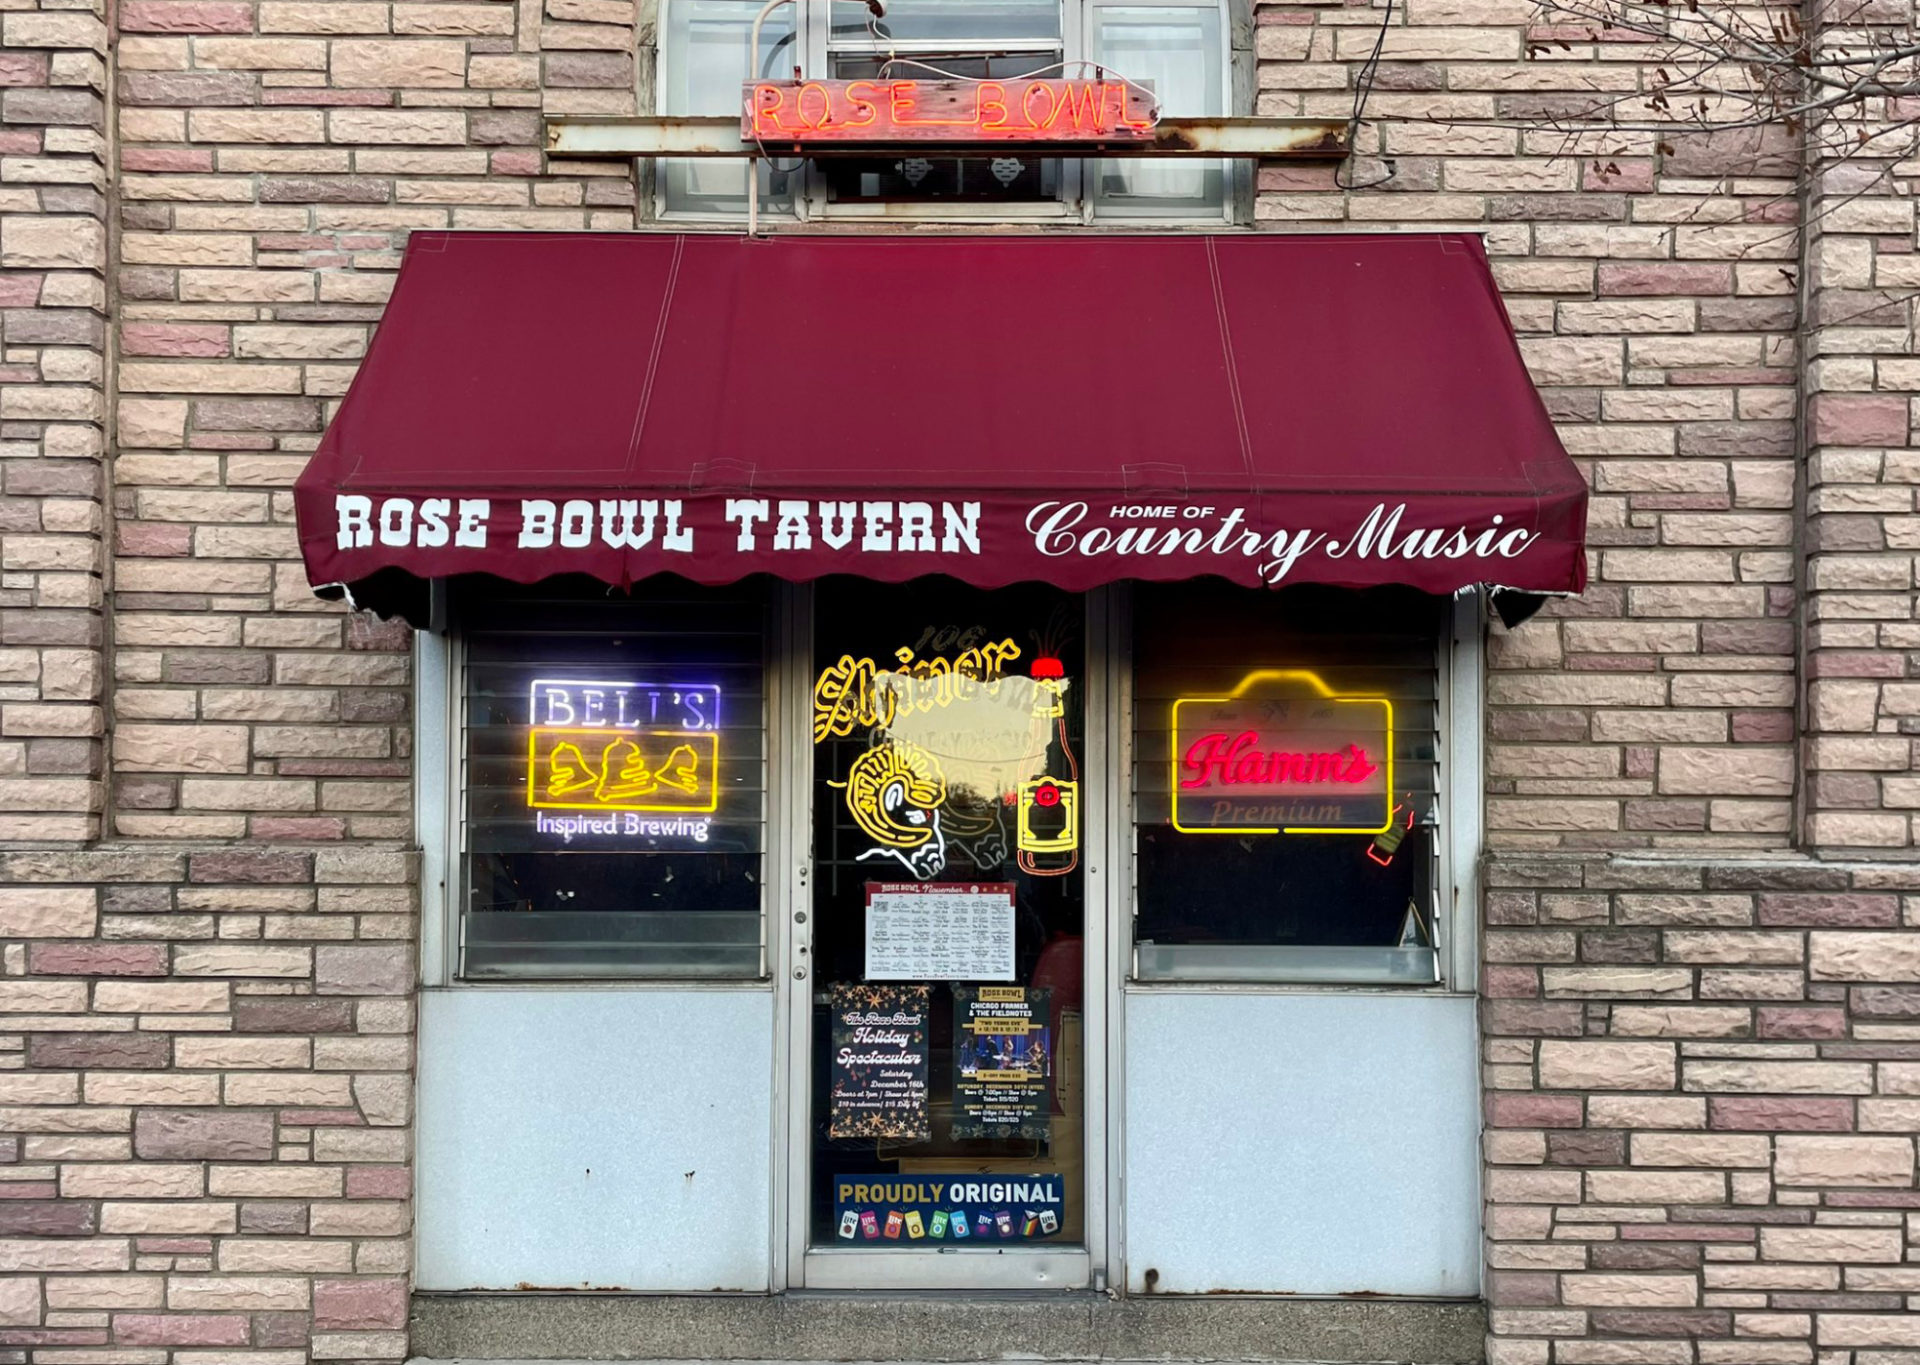 Old entrance to Rose Bowl Tavern. An unusable door / entry in the middle of a blonde brick building. There is a maroon awning over the door that says "Rose Bowl Tavern." There are some neon lights for beer in the window.